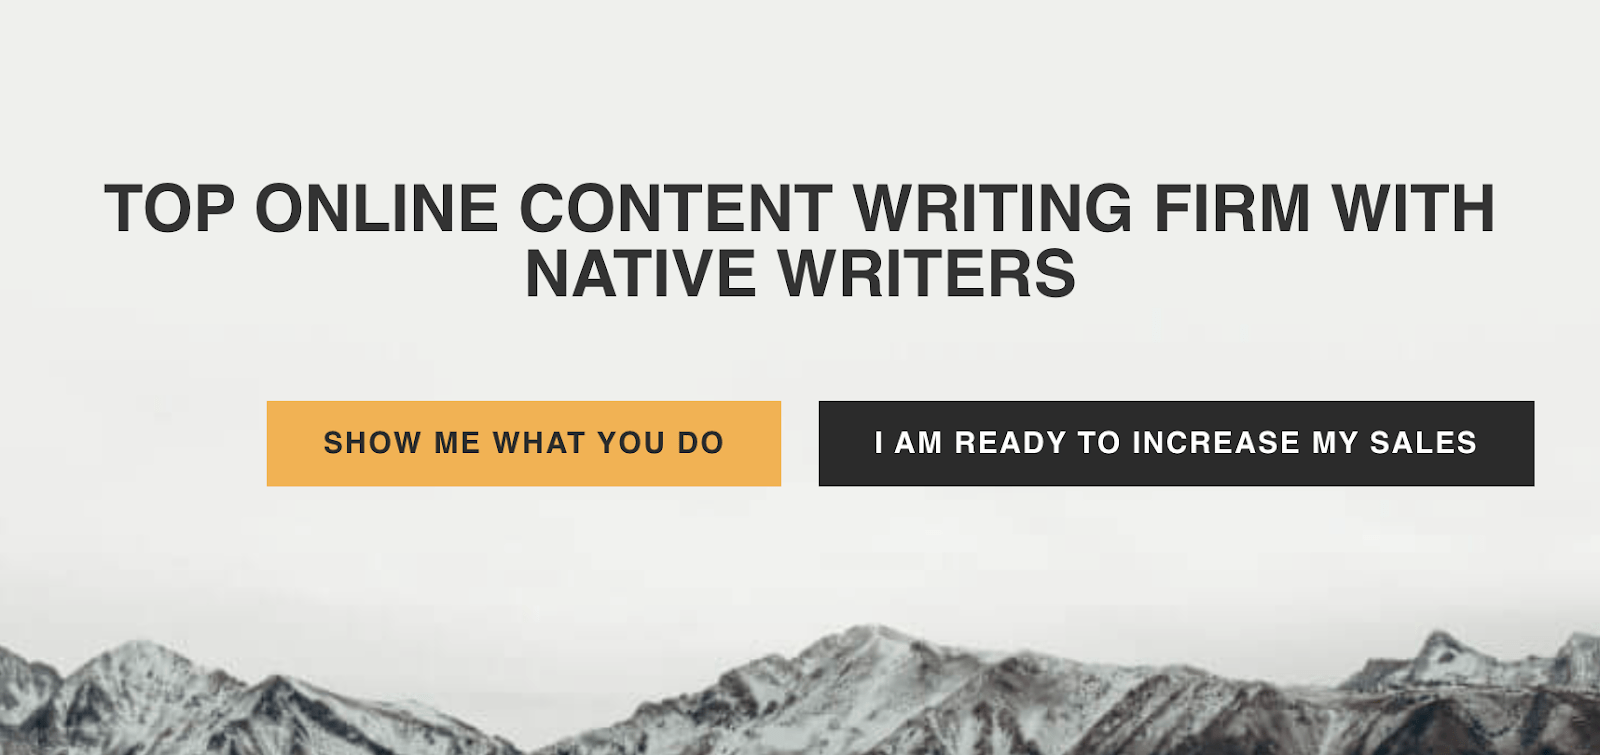 Top online content writing firm that has two CTA's. "Show me what you do" and "I'm ready to increase my sales"